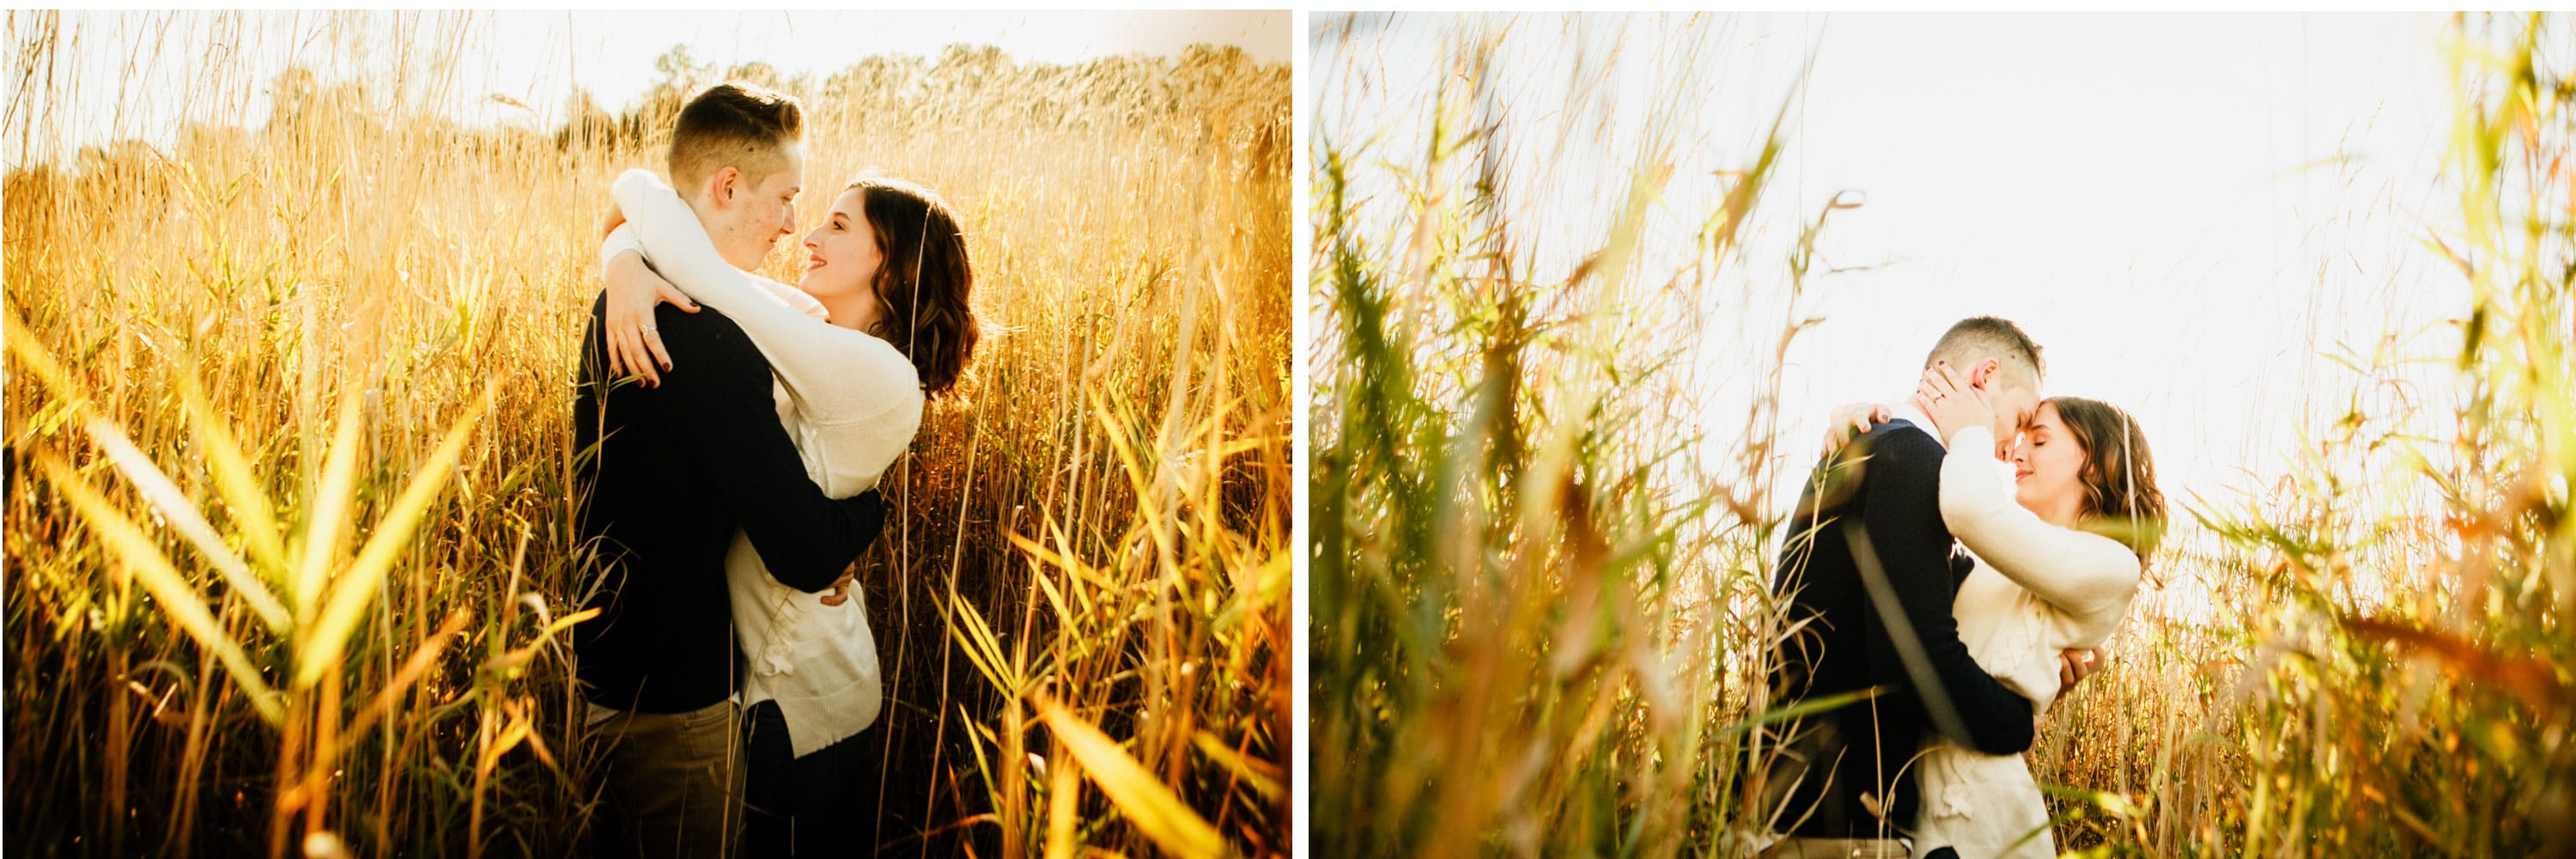 pnw adventure engagement session in bellingham wa fall photo inspiration Hovander